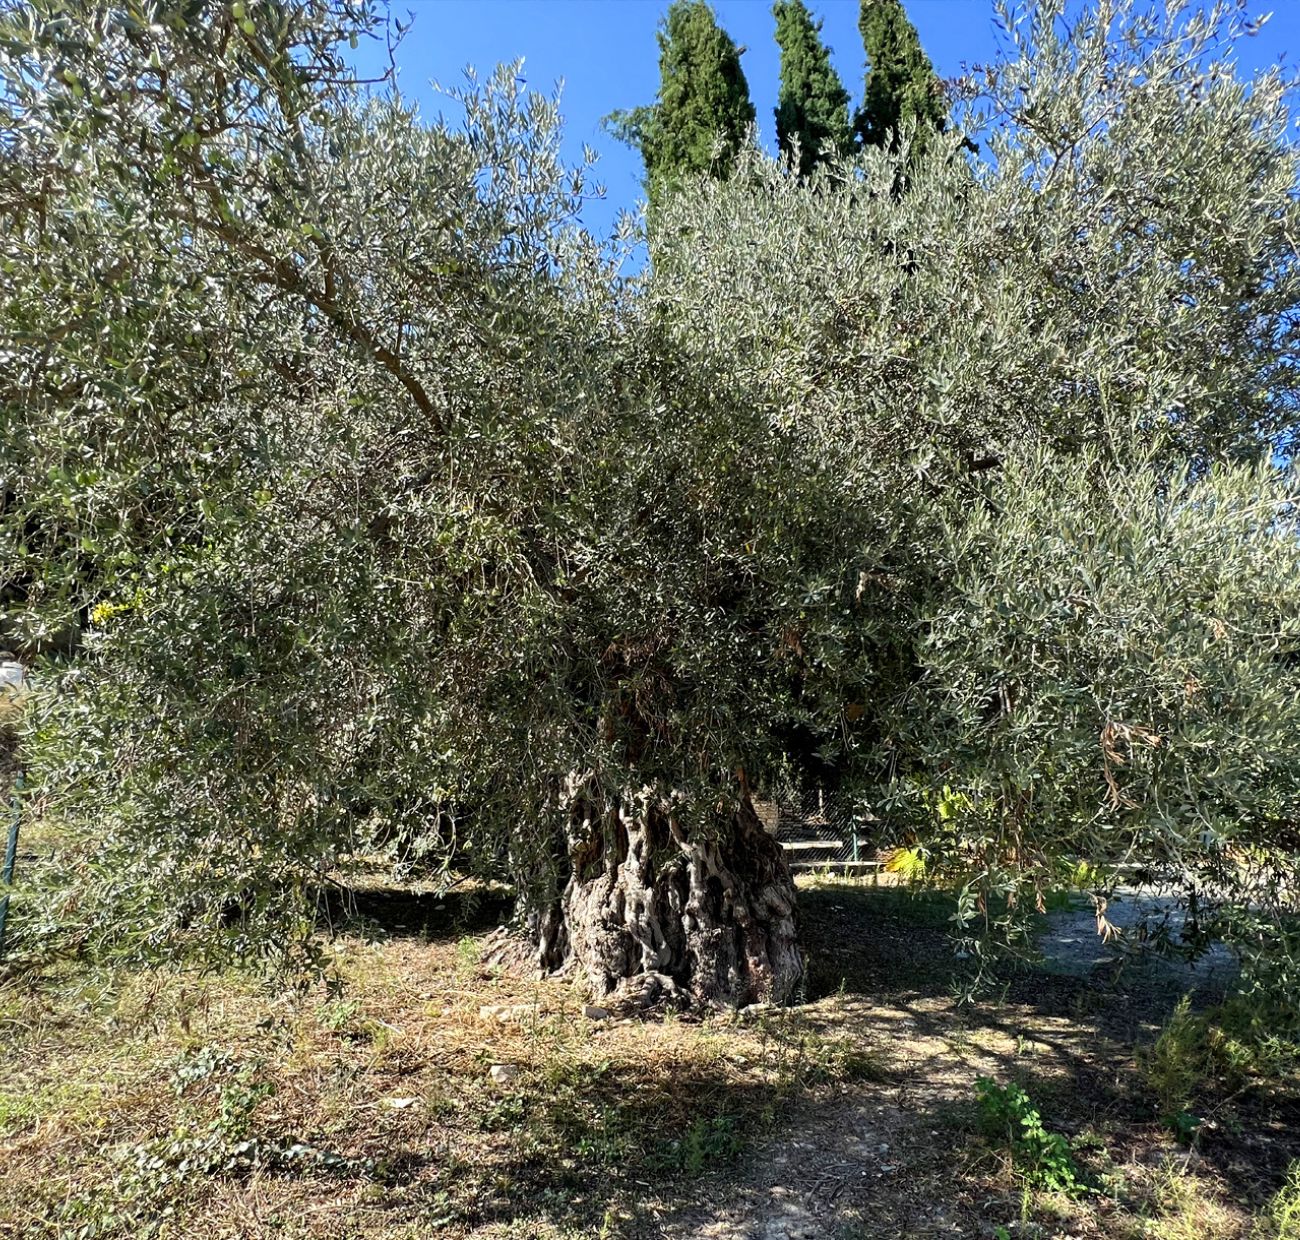 Old Olive trees